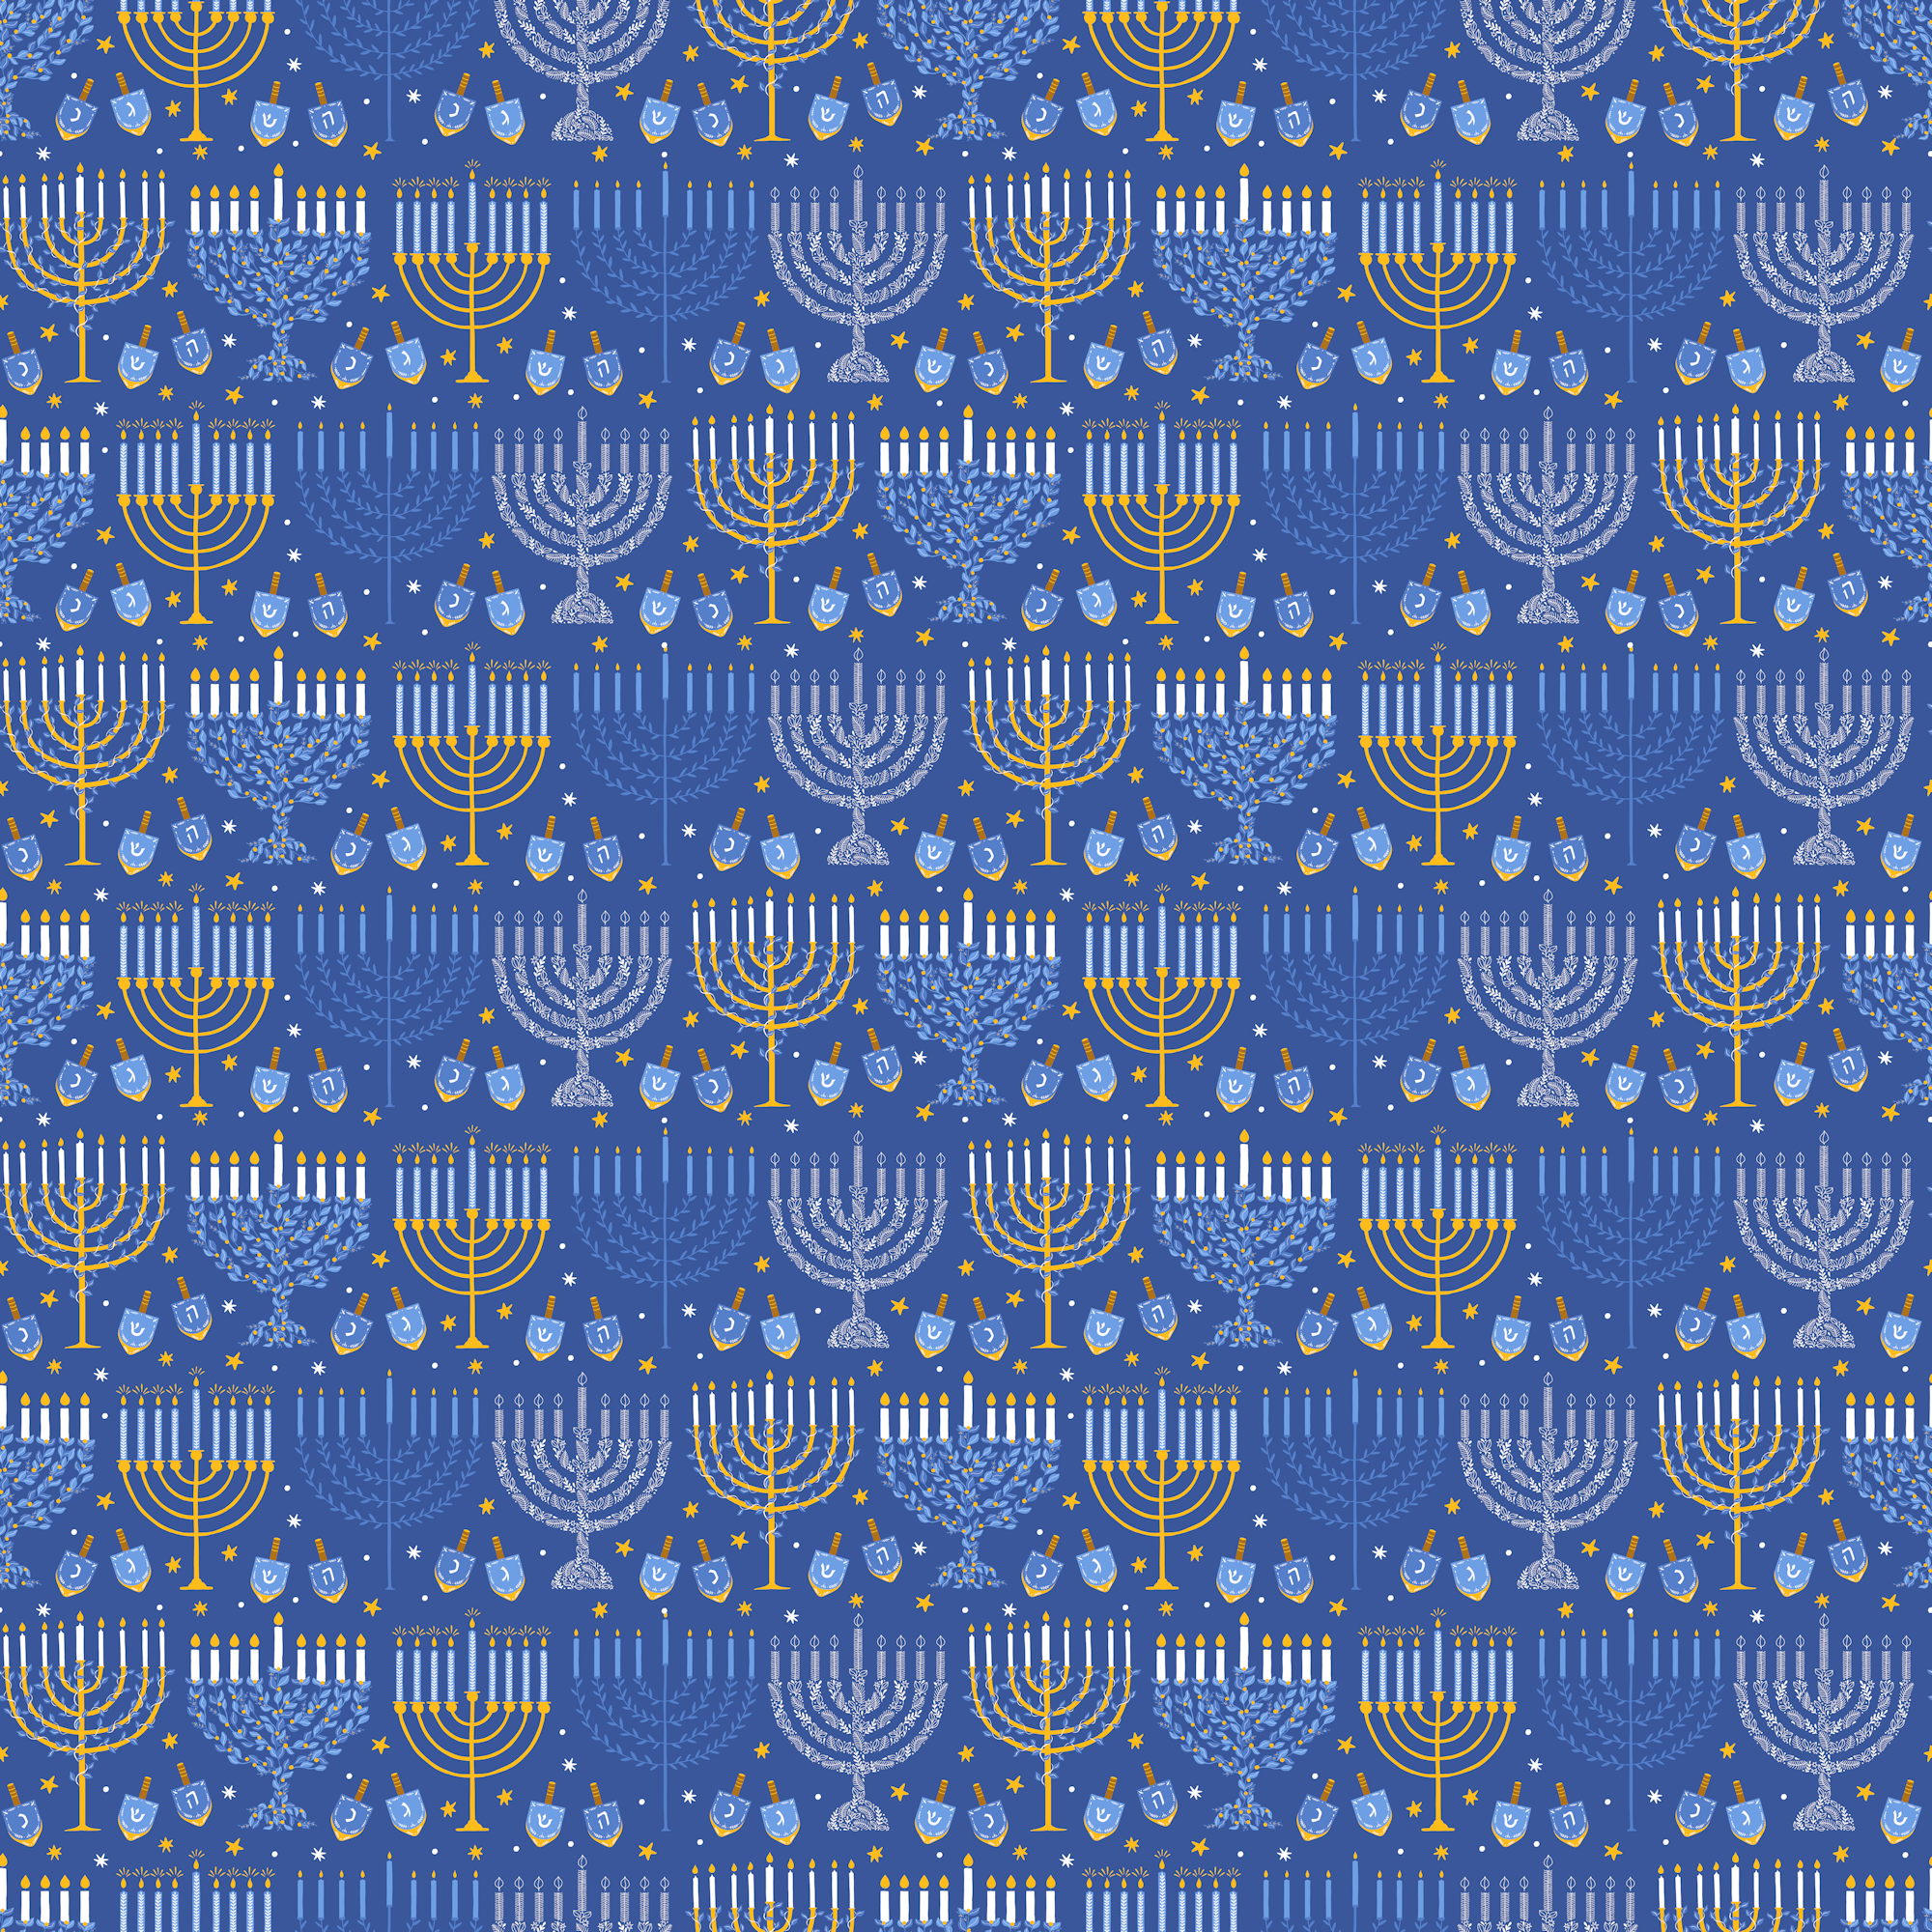 Festival of Lights Collection Dreidel 12 x 12 Double-Sided Scrapbook Paper by SSC Designs